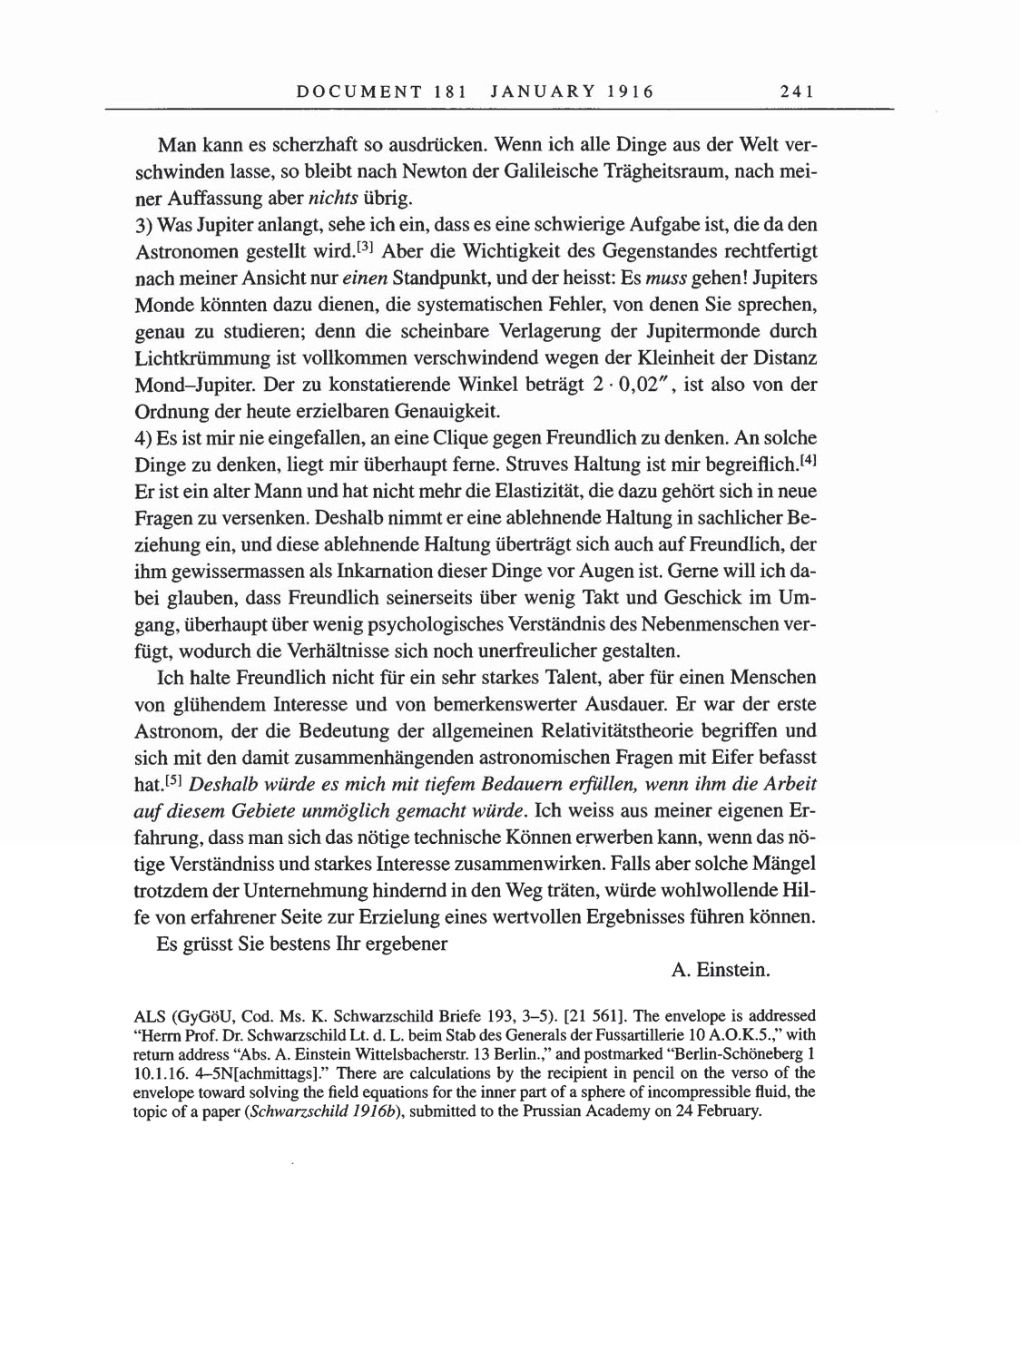 Volume 8, Part A: The Berlin Years: Correspondence 1914-1917 page 241